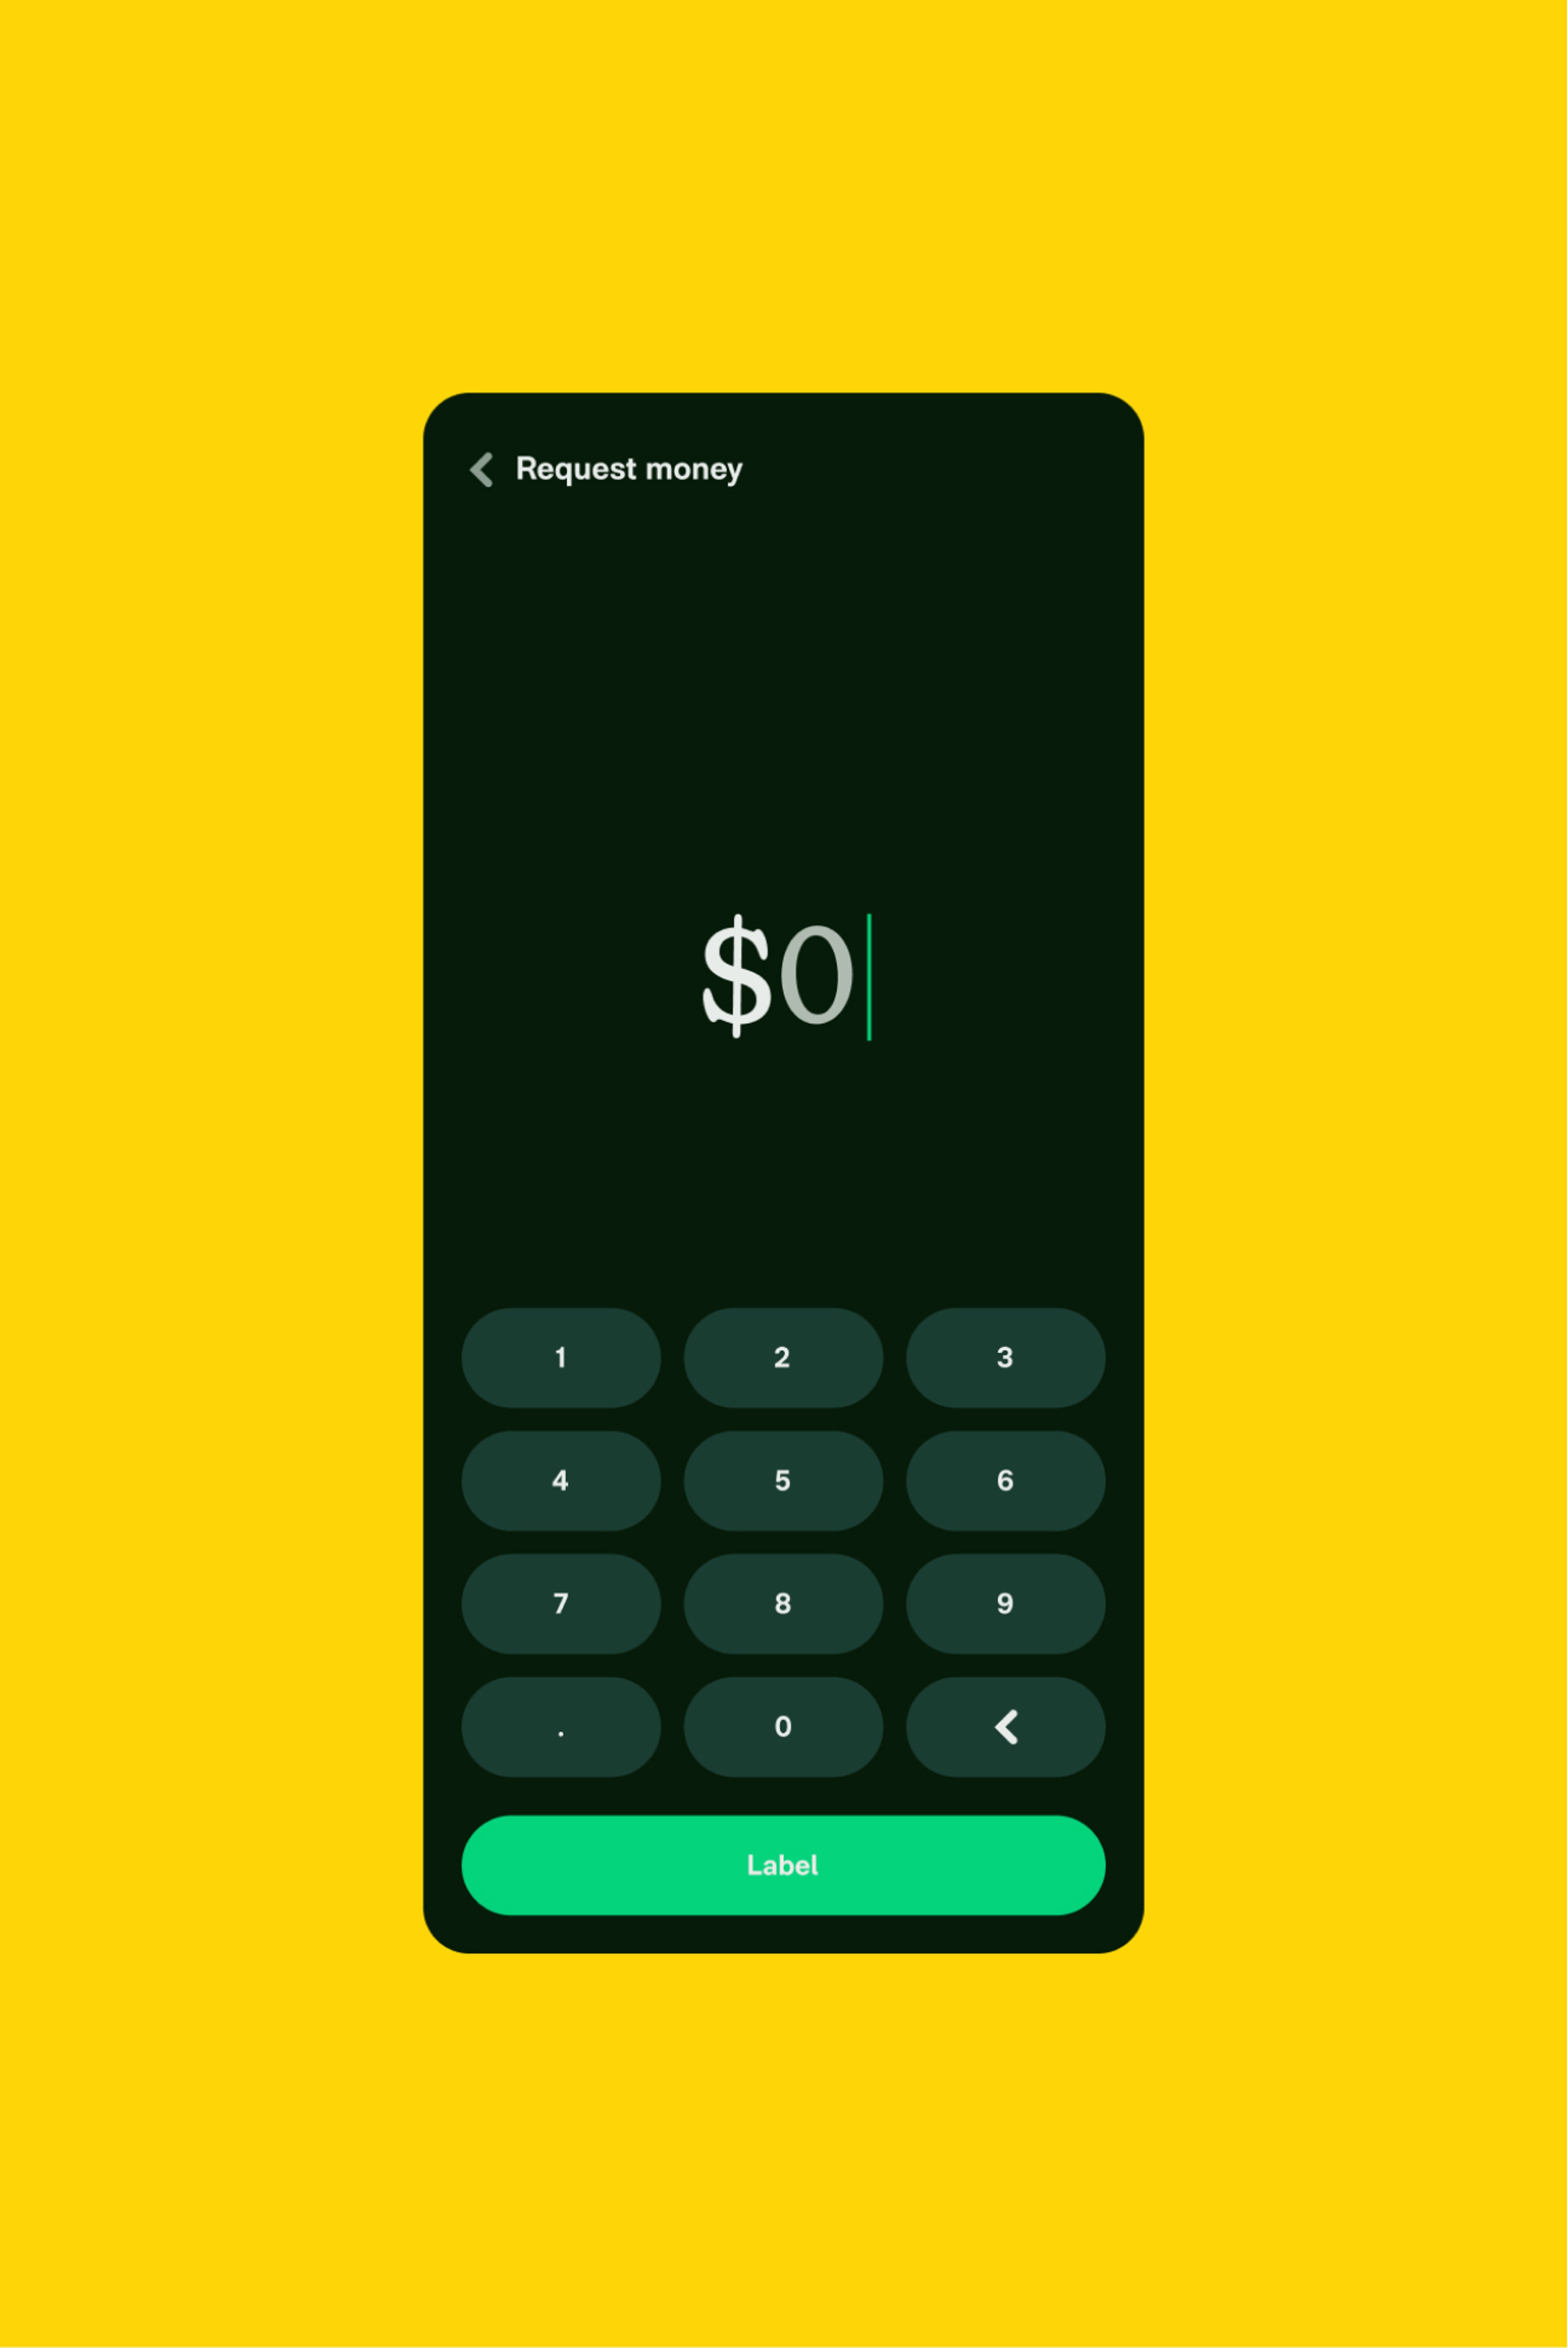 A screenshot of the Expensify app showing a Request Money screen.